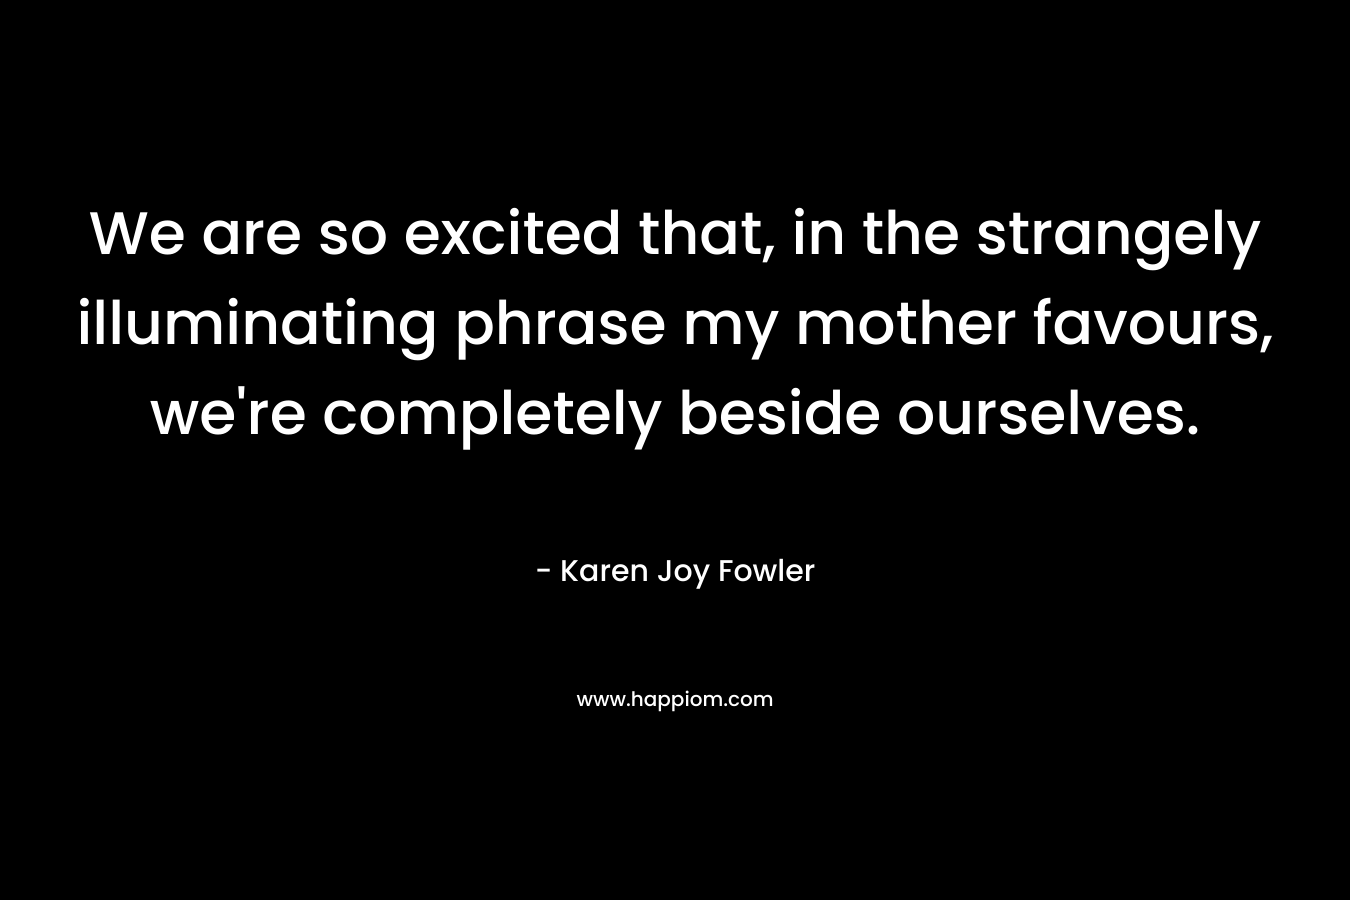 We are so excited that, in the strangely illuminating phrase my mother favours, we're completely beside ourselves.